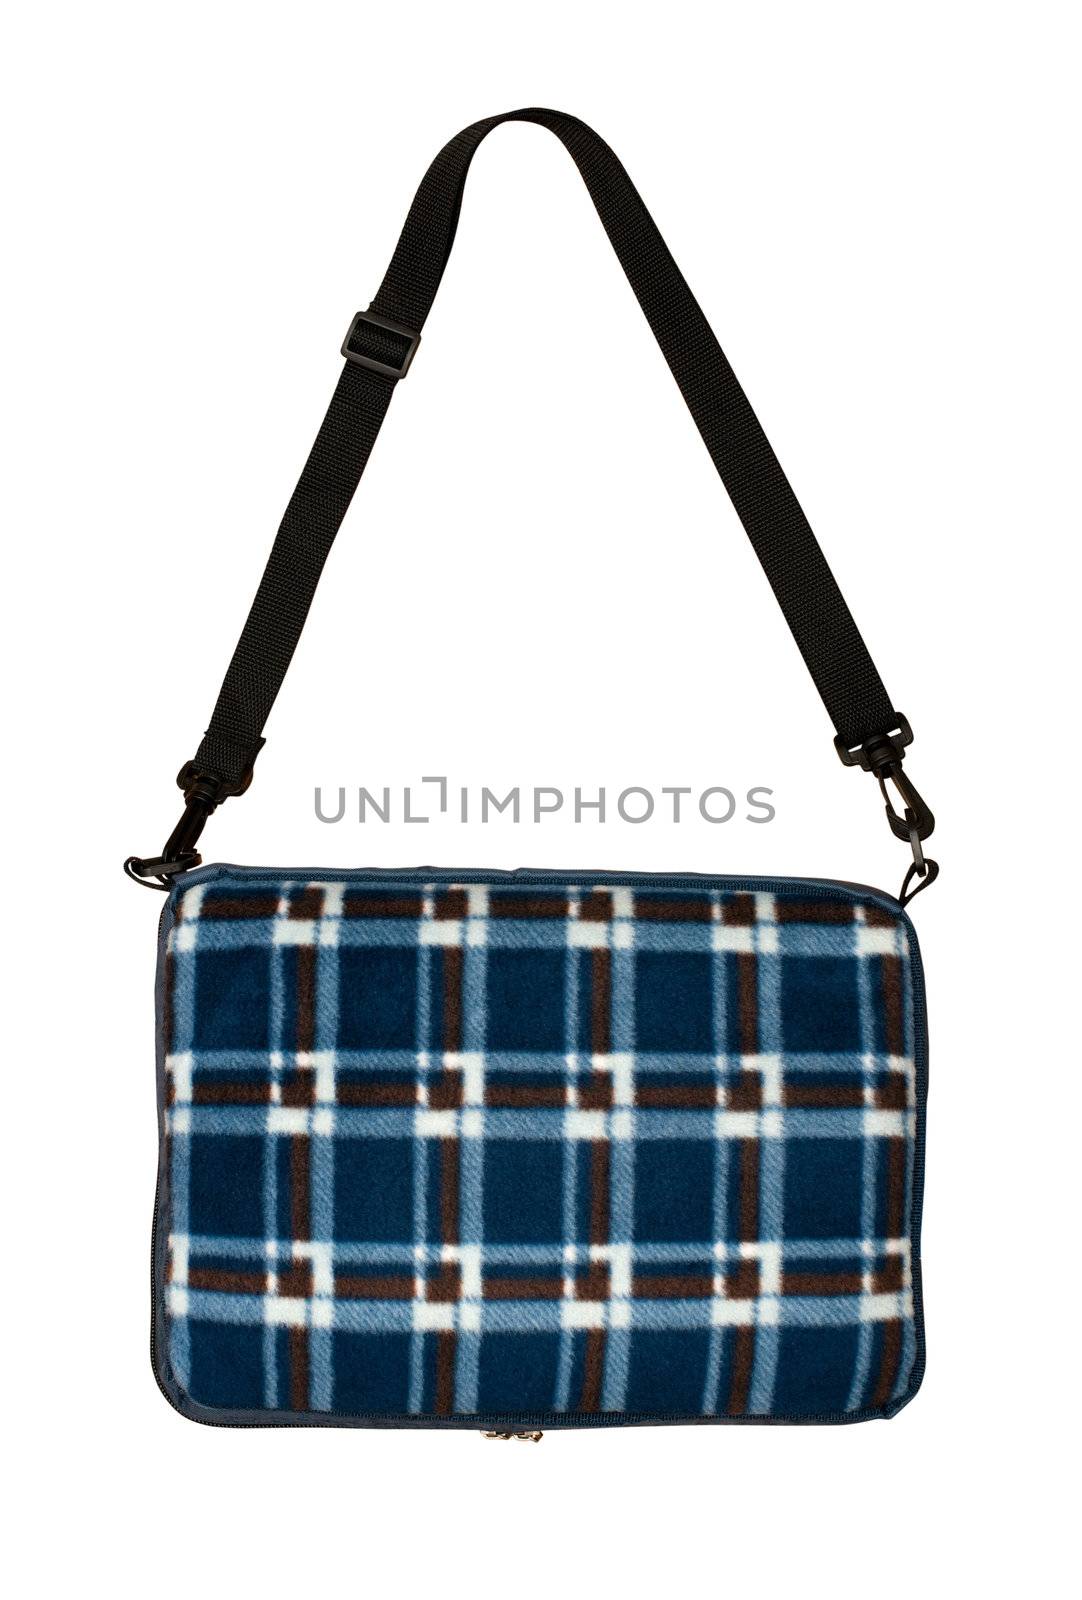 Bag plaid on a white background